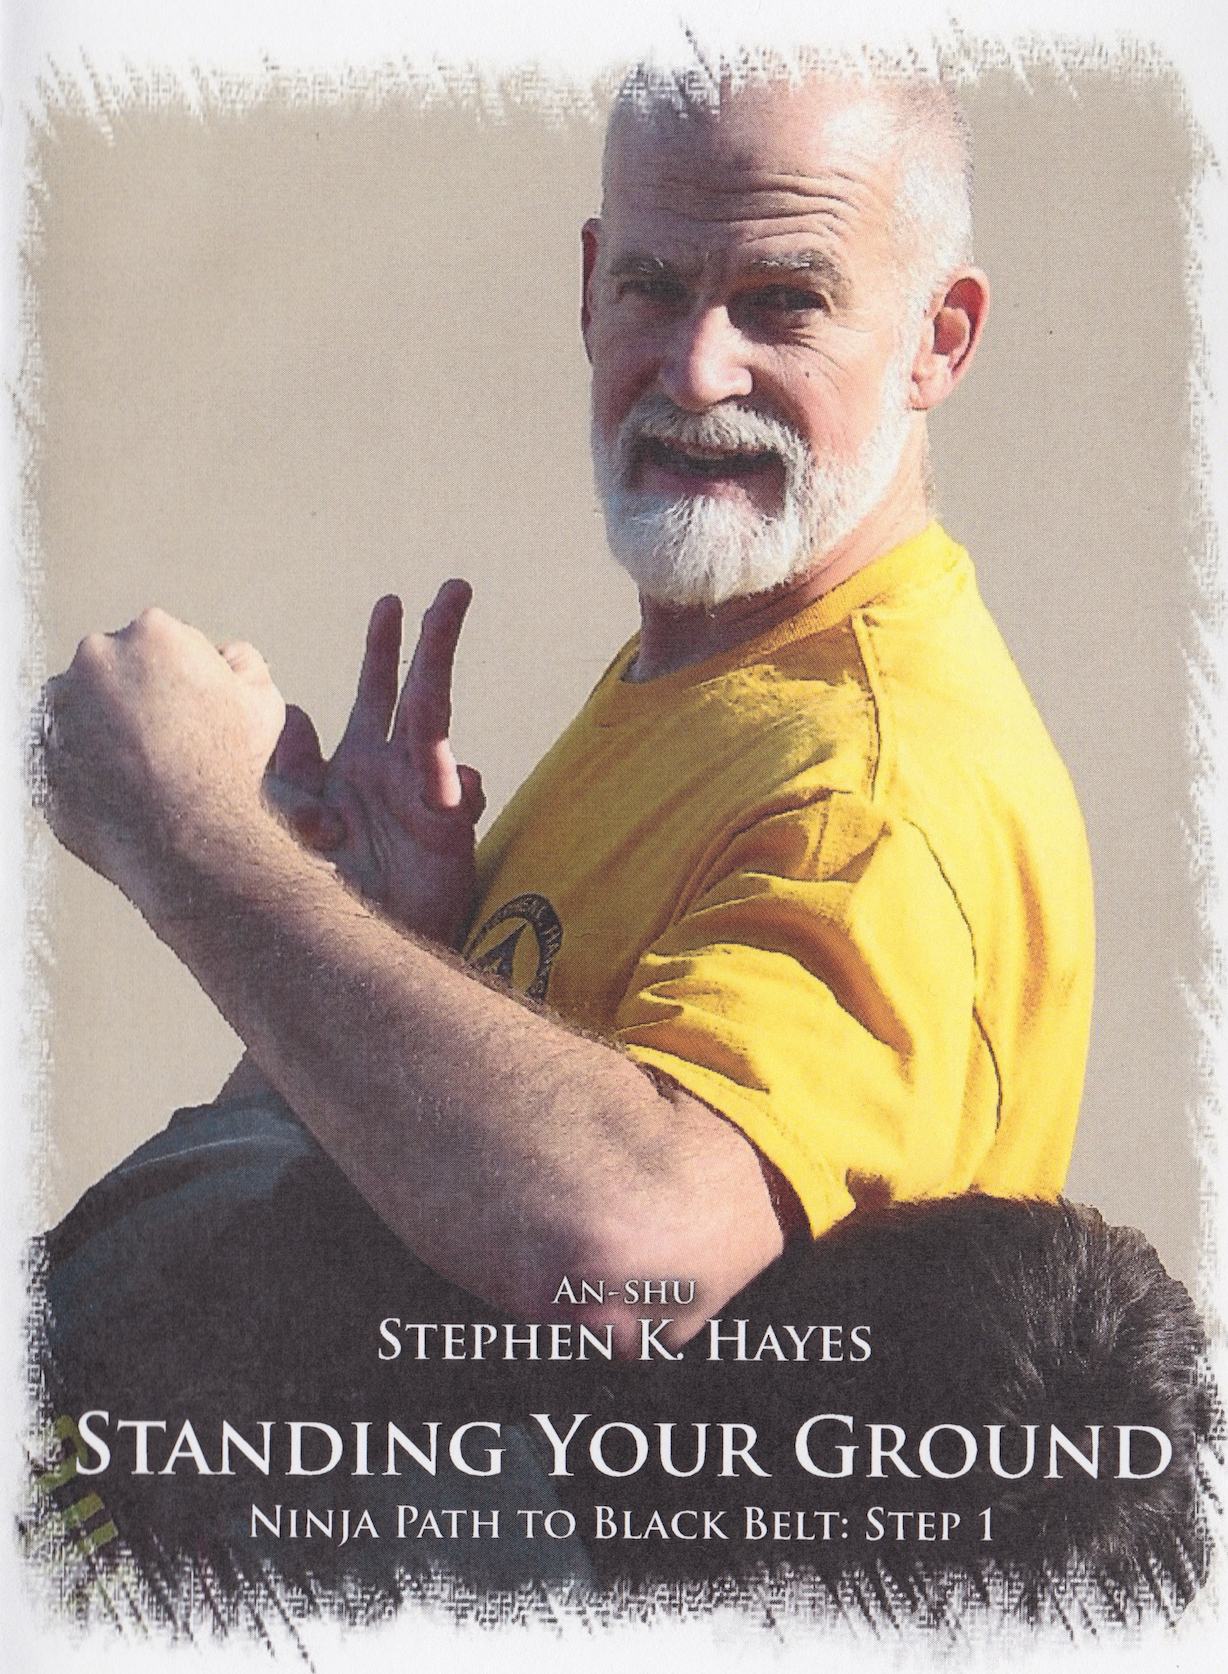 Mountains of Strength：Standing your ground スティーブン・ヘイズ出演の DVD 3 セット